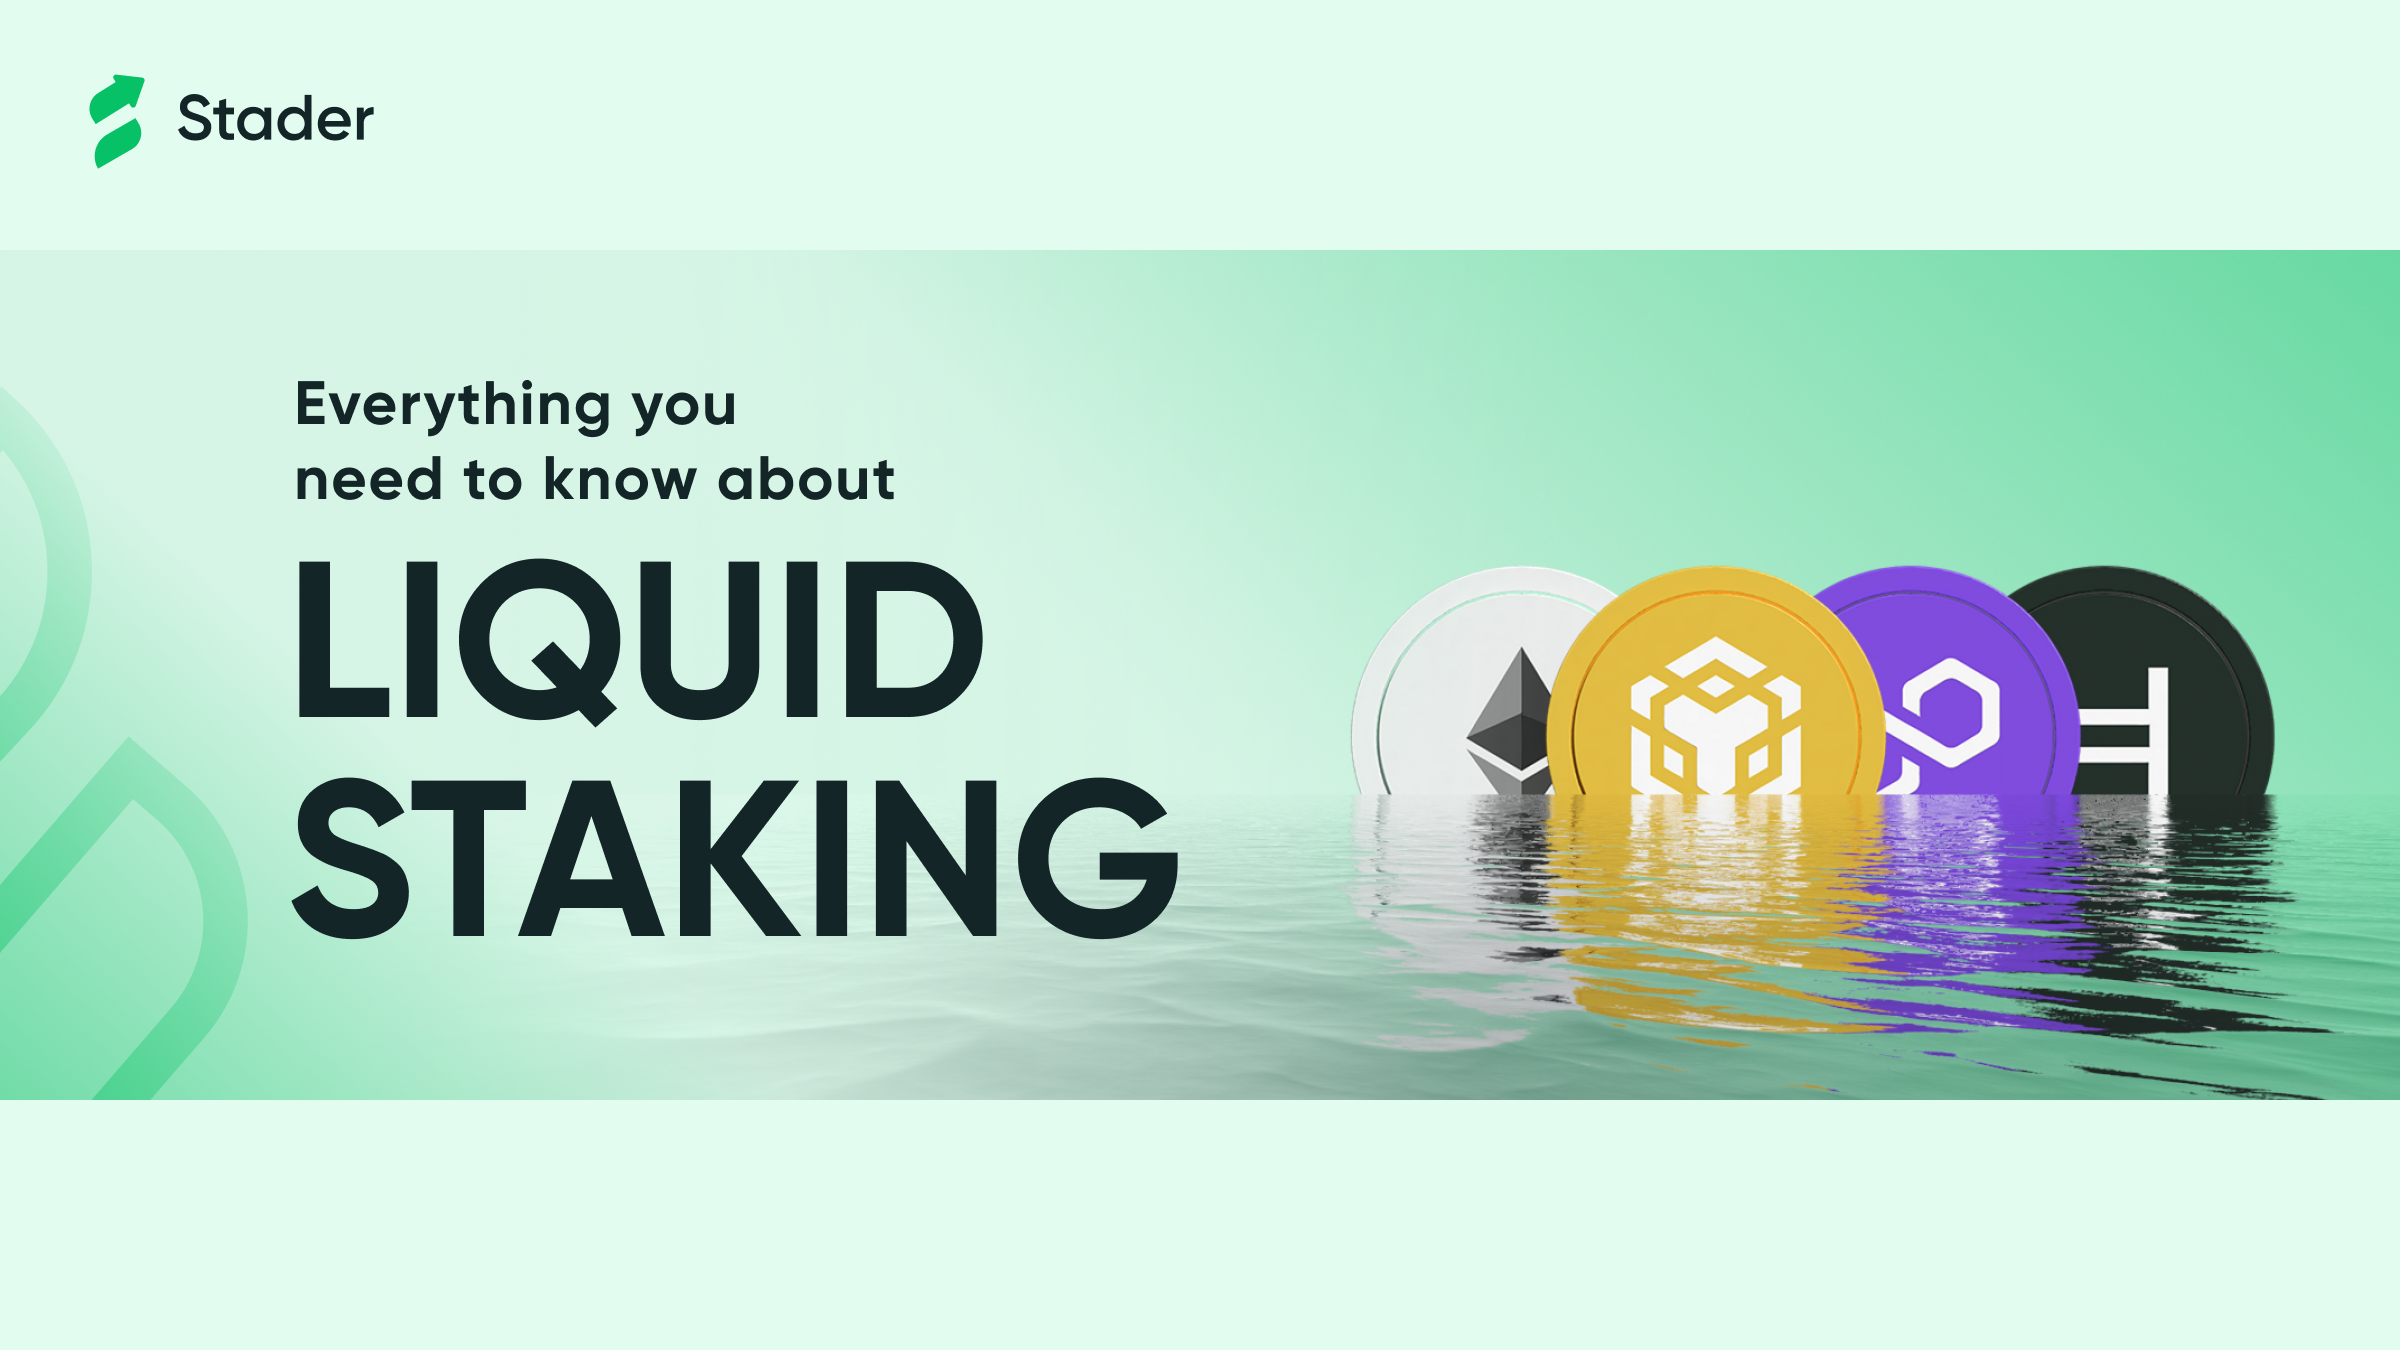 liquid staking – a game-changing concept that allows investors to earn staking rewards without compromising liquidity.